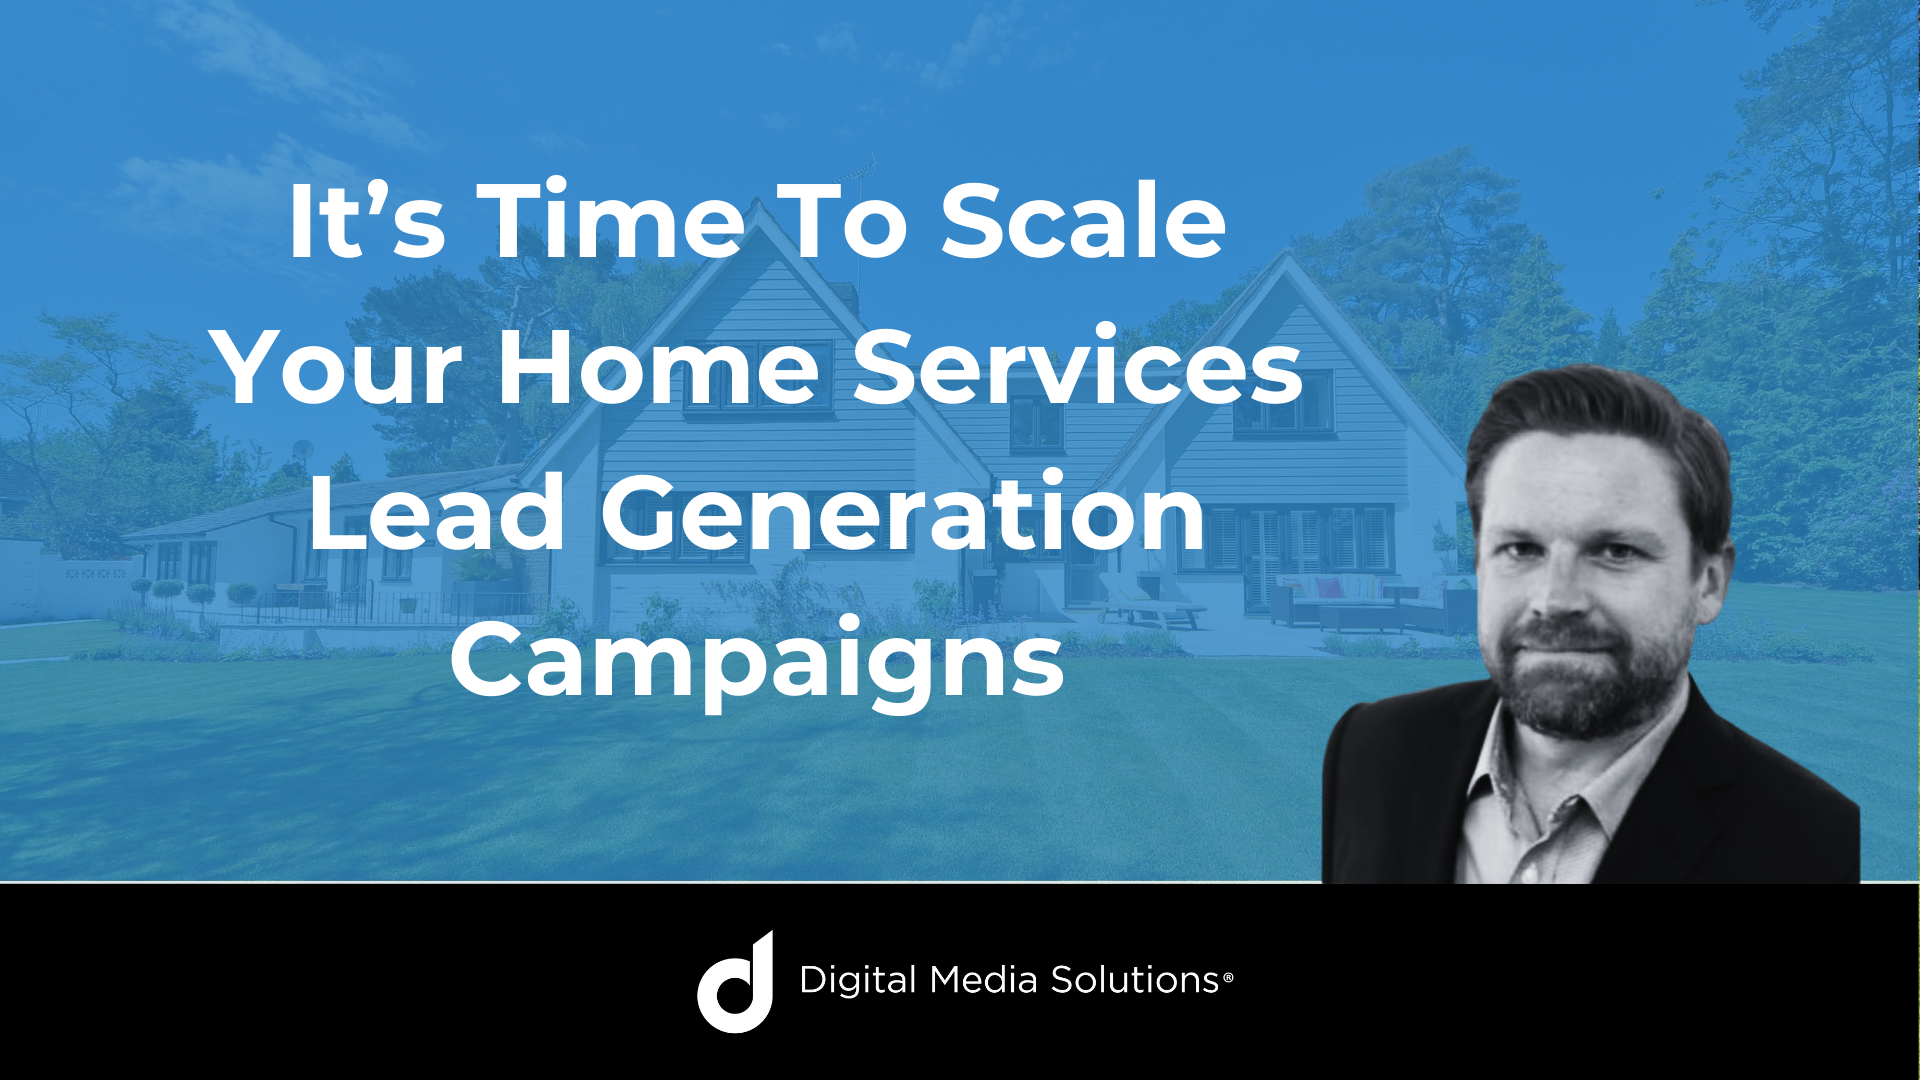 It’s Time To Scale Your Home Services Lead Generation Campaigns